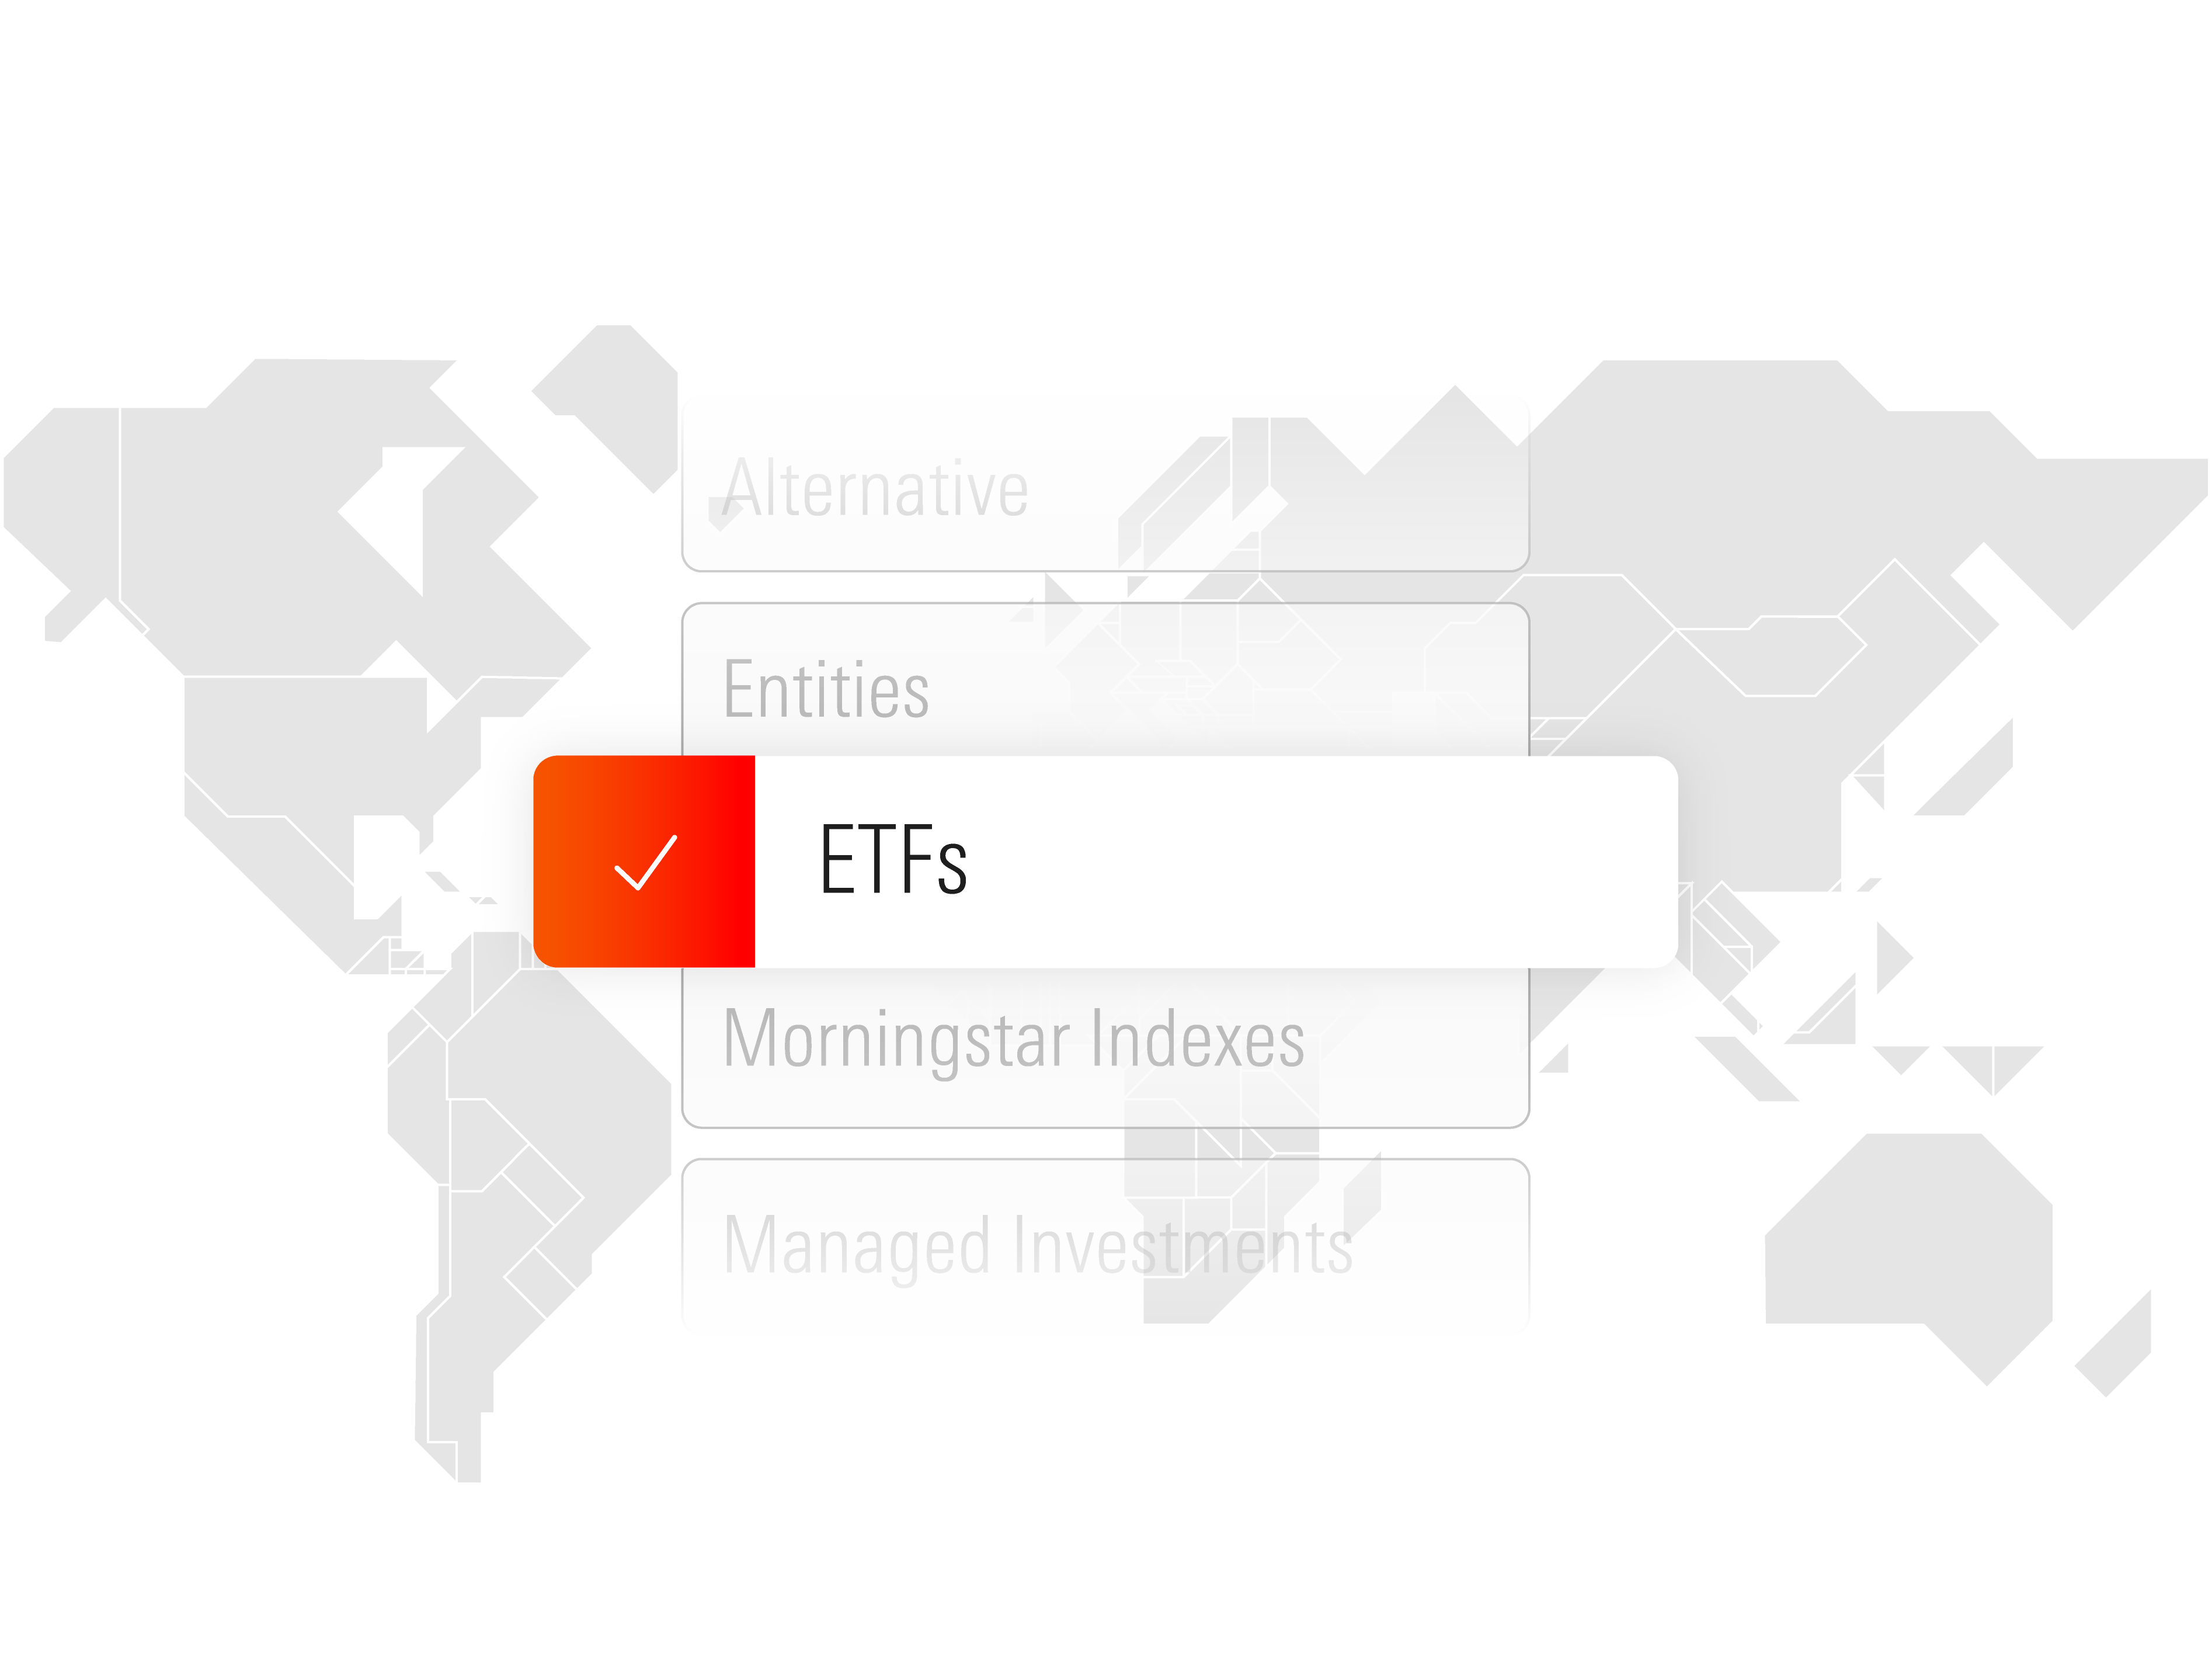 Illustration of Morningstar's broad global coverage across entities, ETFs, and managed investments.